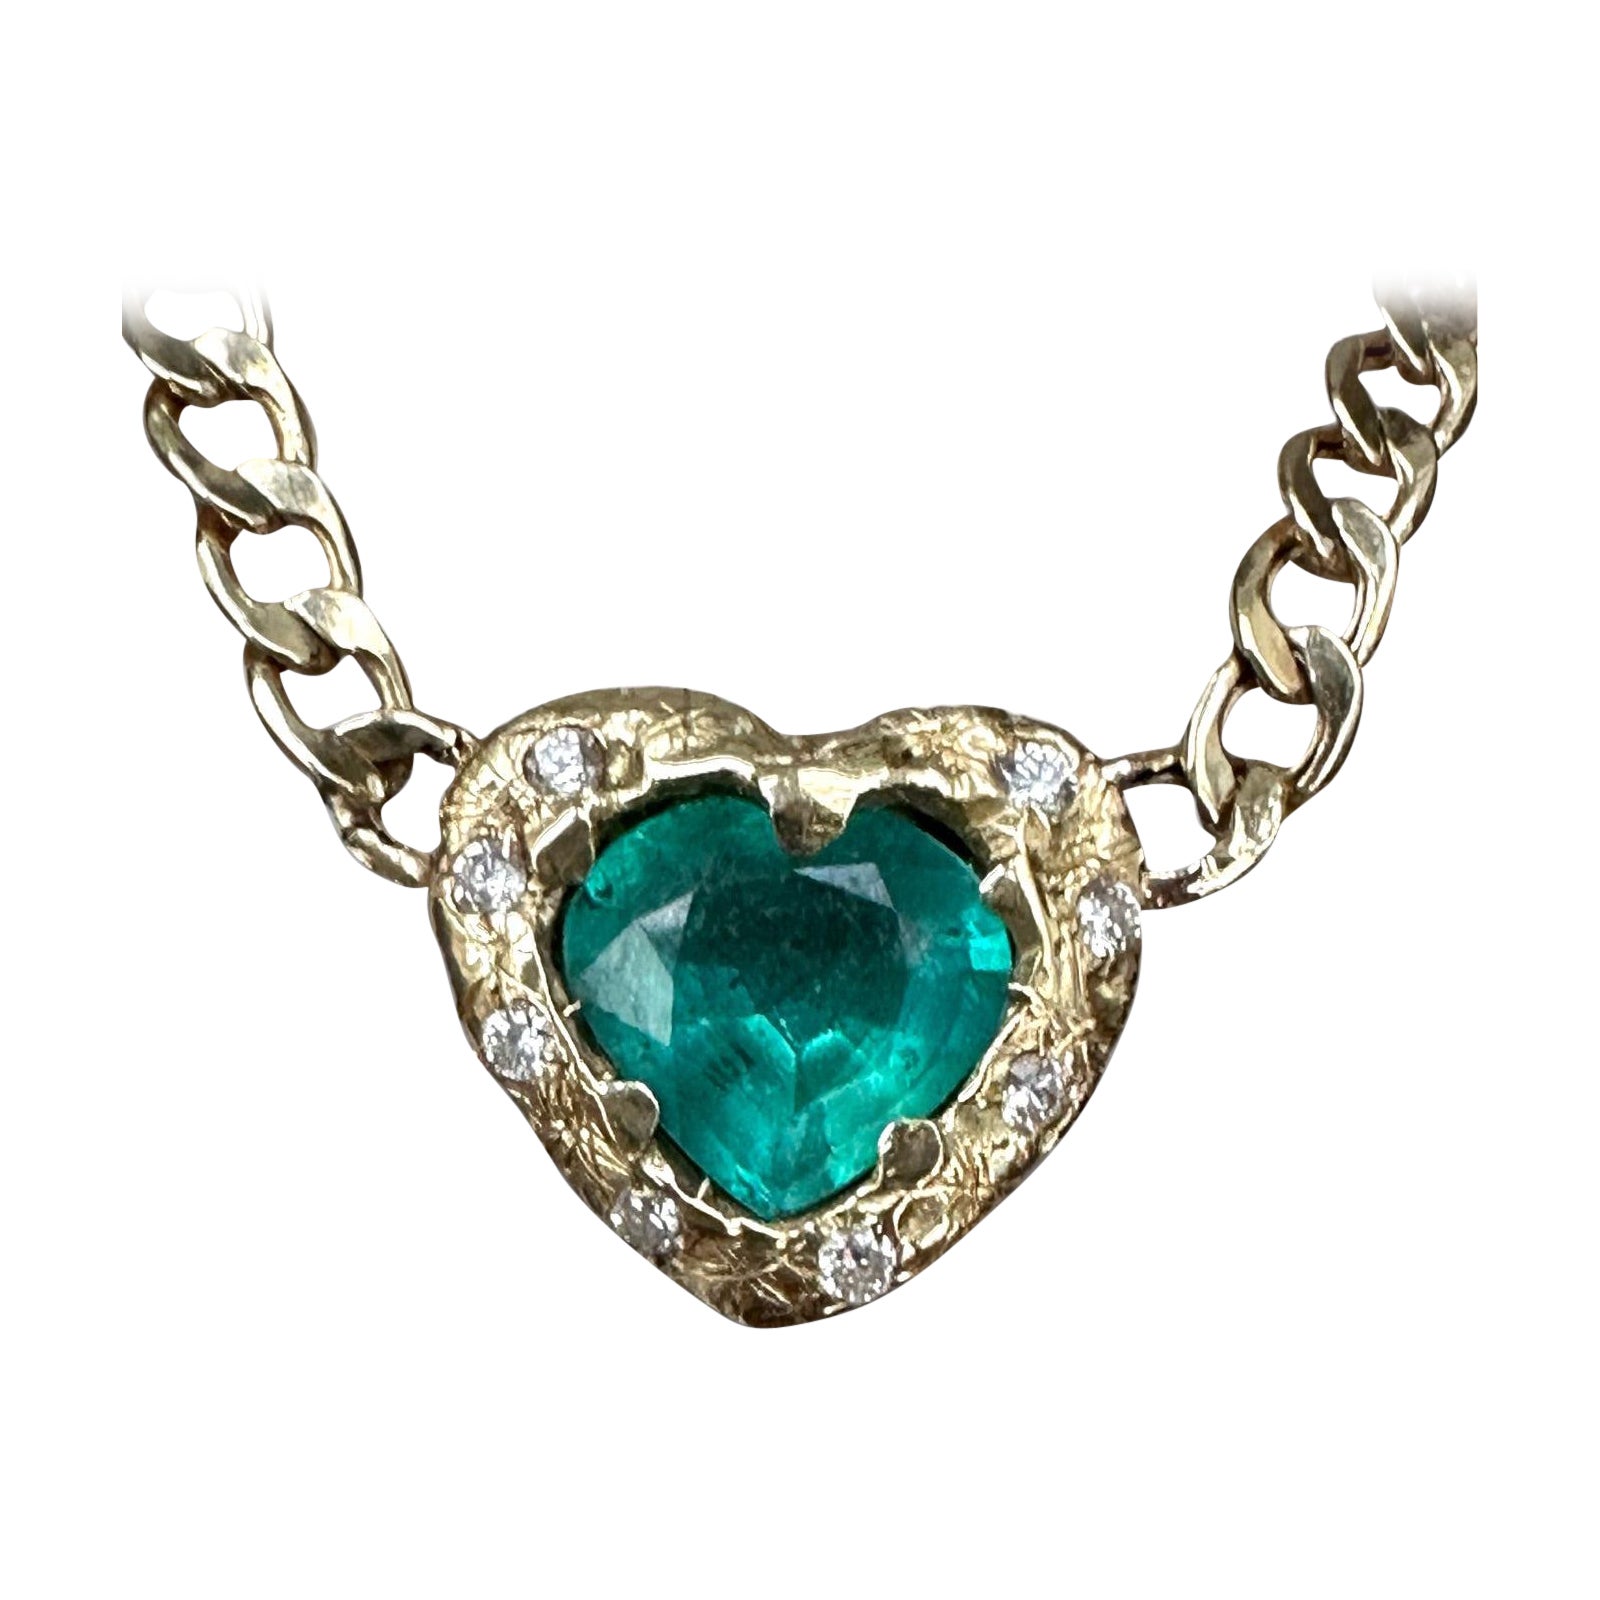 Emerald Heart Necklace and Choker with Diamonds on a Cuban Link Chain One of For Sale